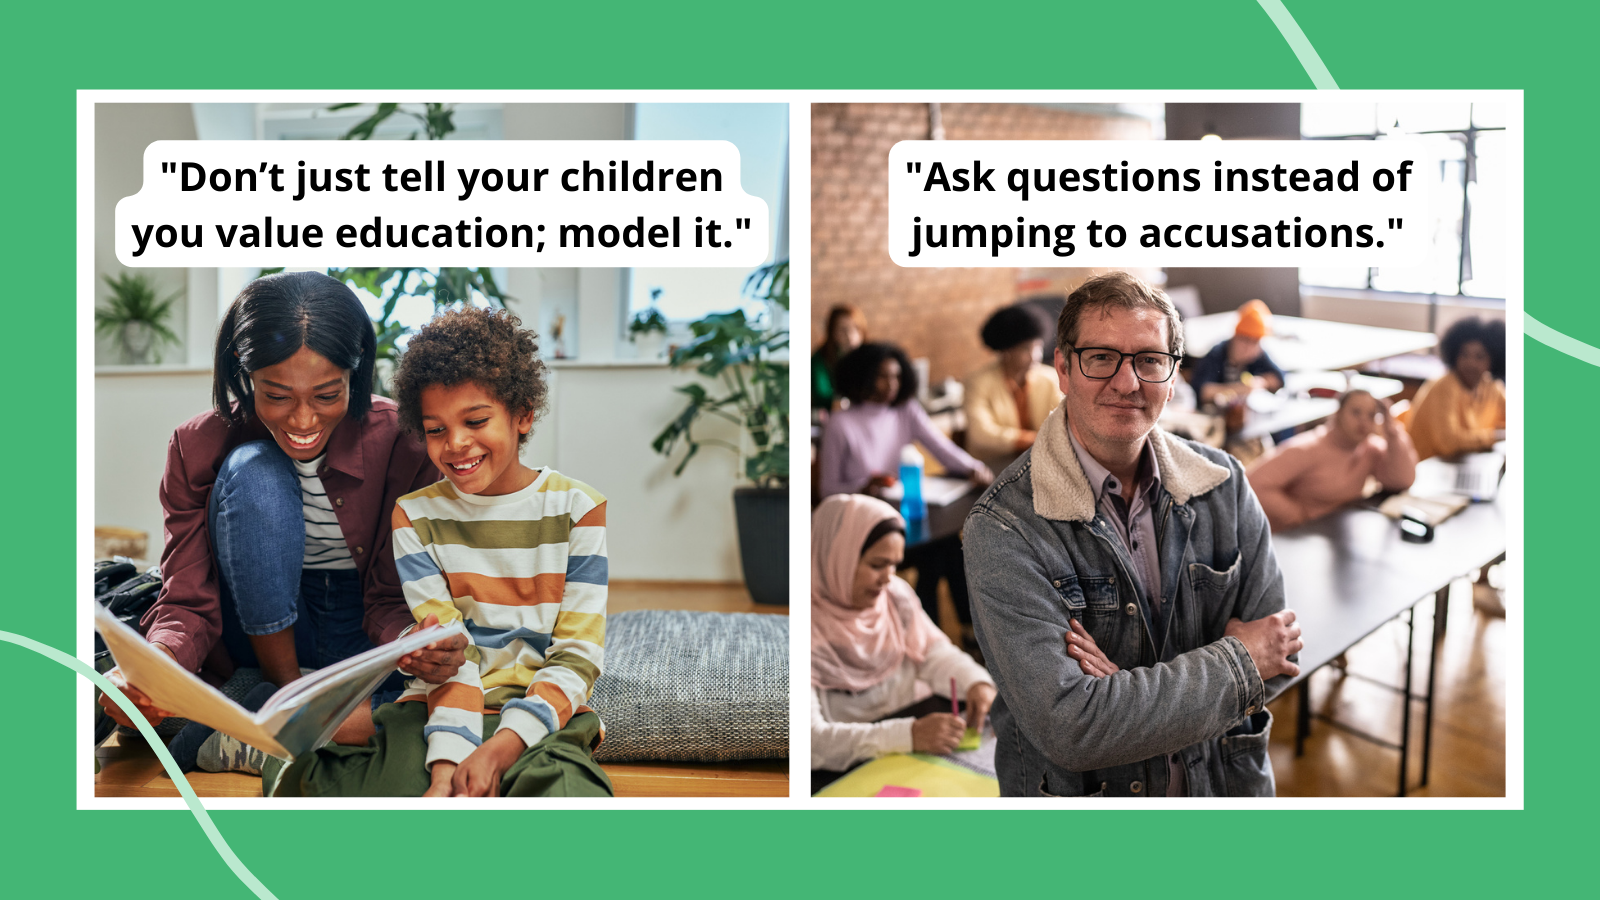 Paired images demonstrating how to make teachers' lives easier